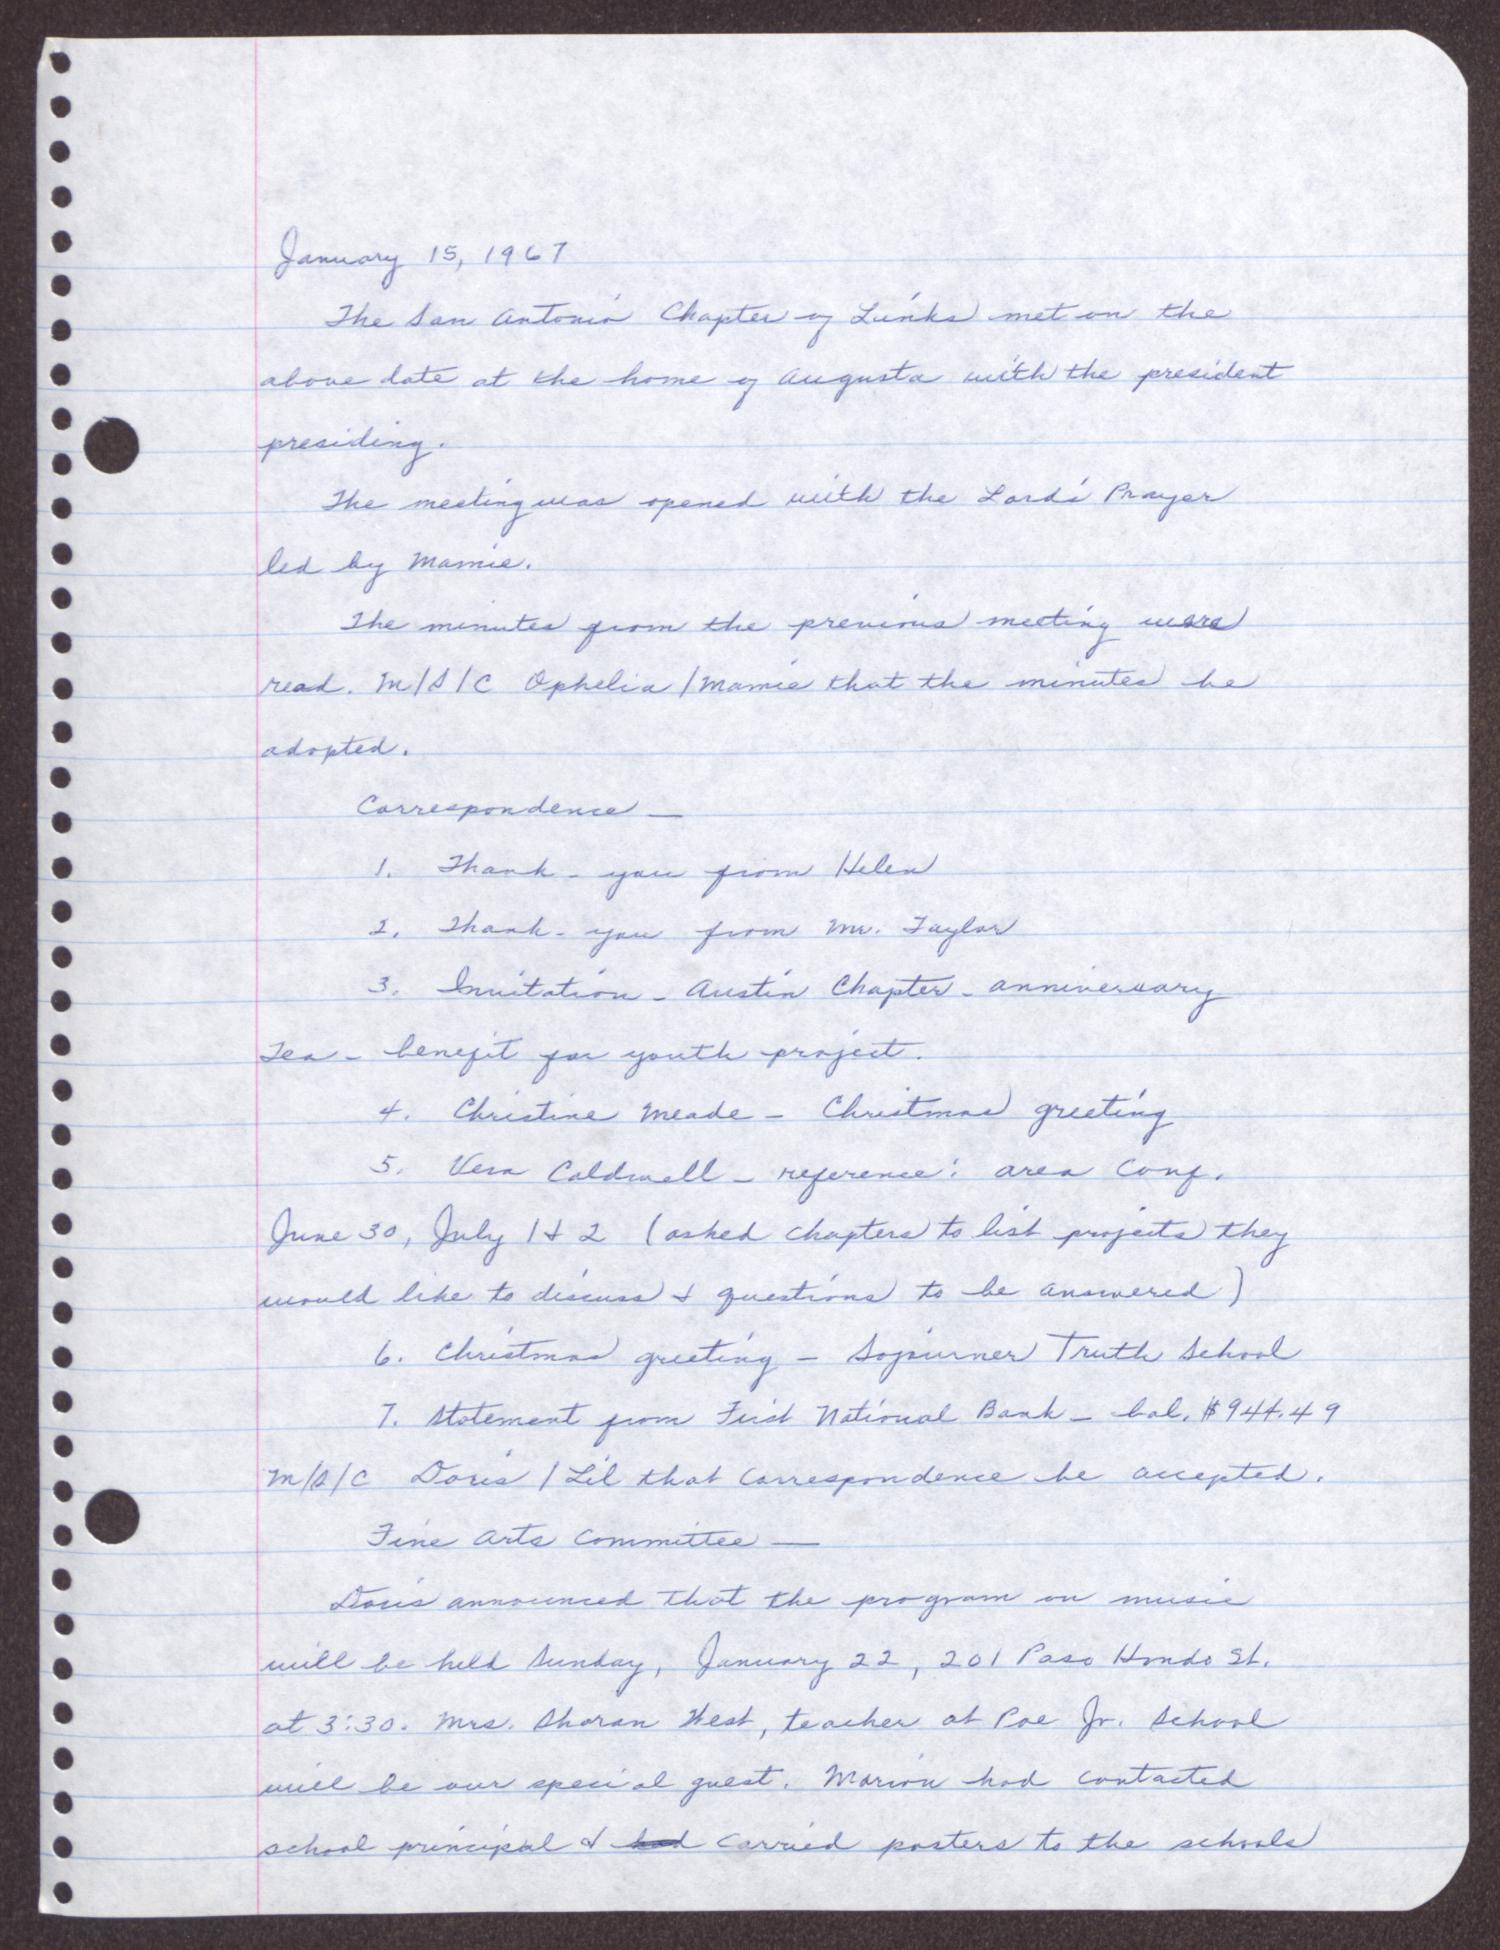 [Minutes for the San Antonio Chapter of the Links, Inc. Meeting - January 15, 1967]
                                                
                                                    [Sequence #]: 1 of 4
                                                